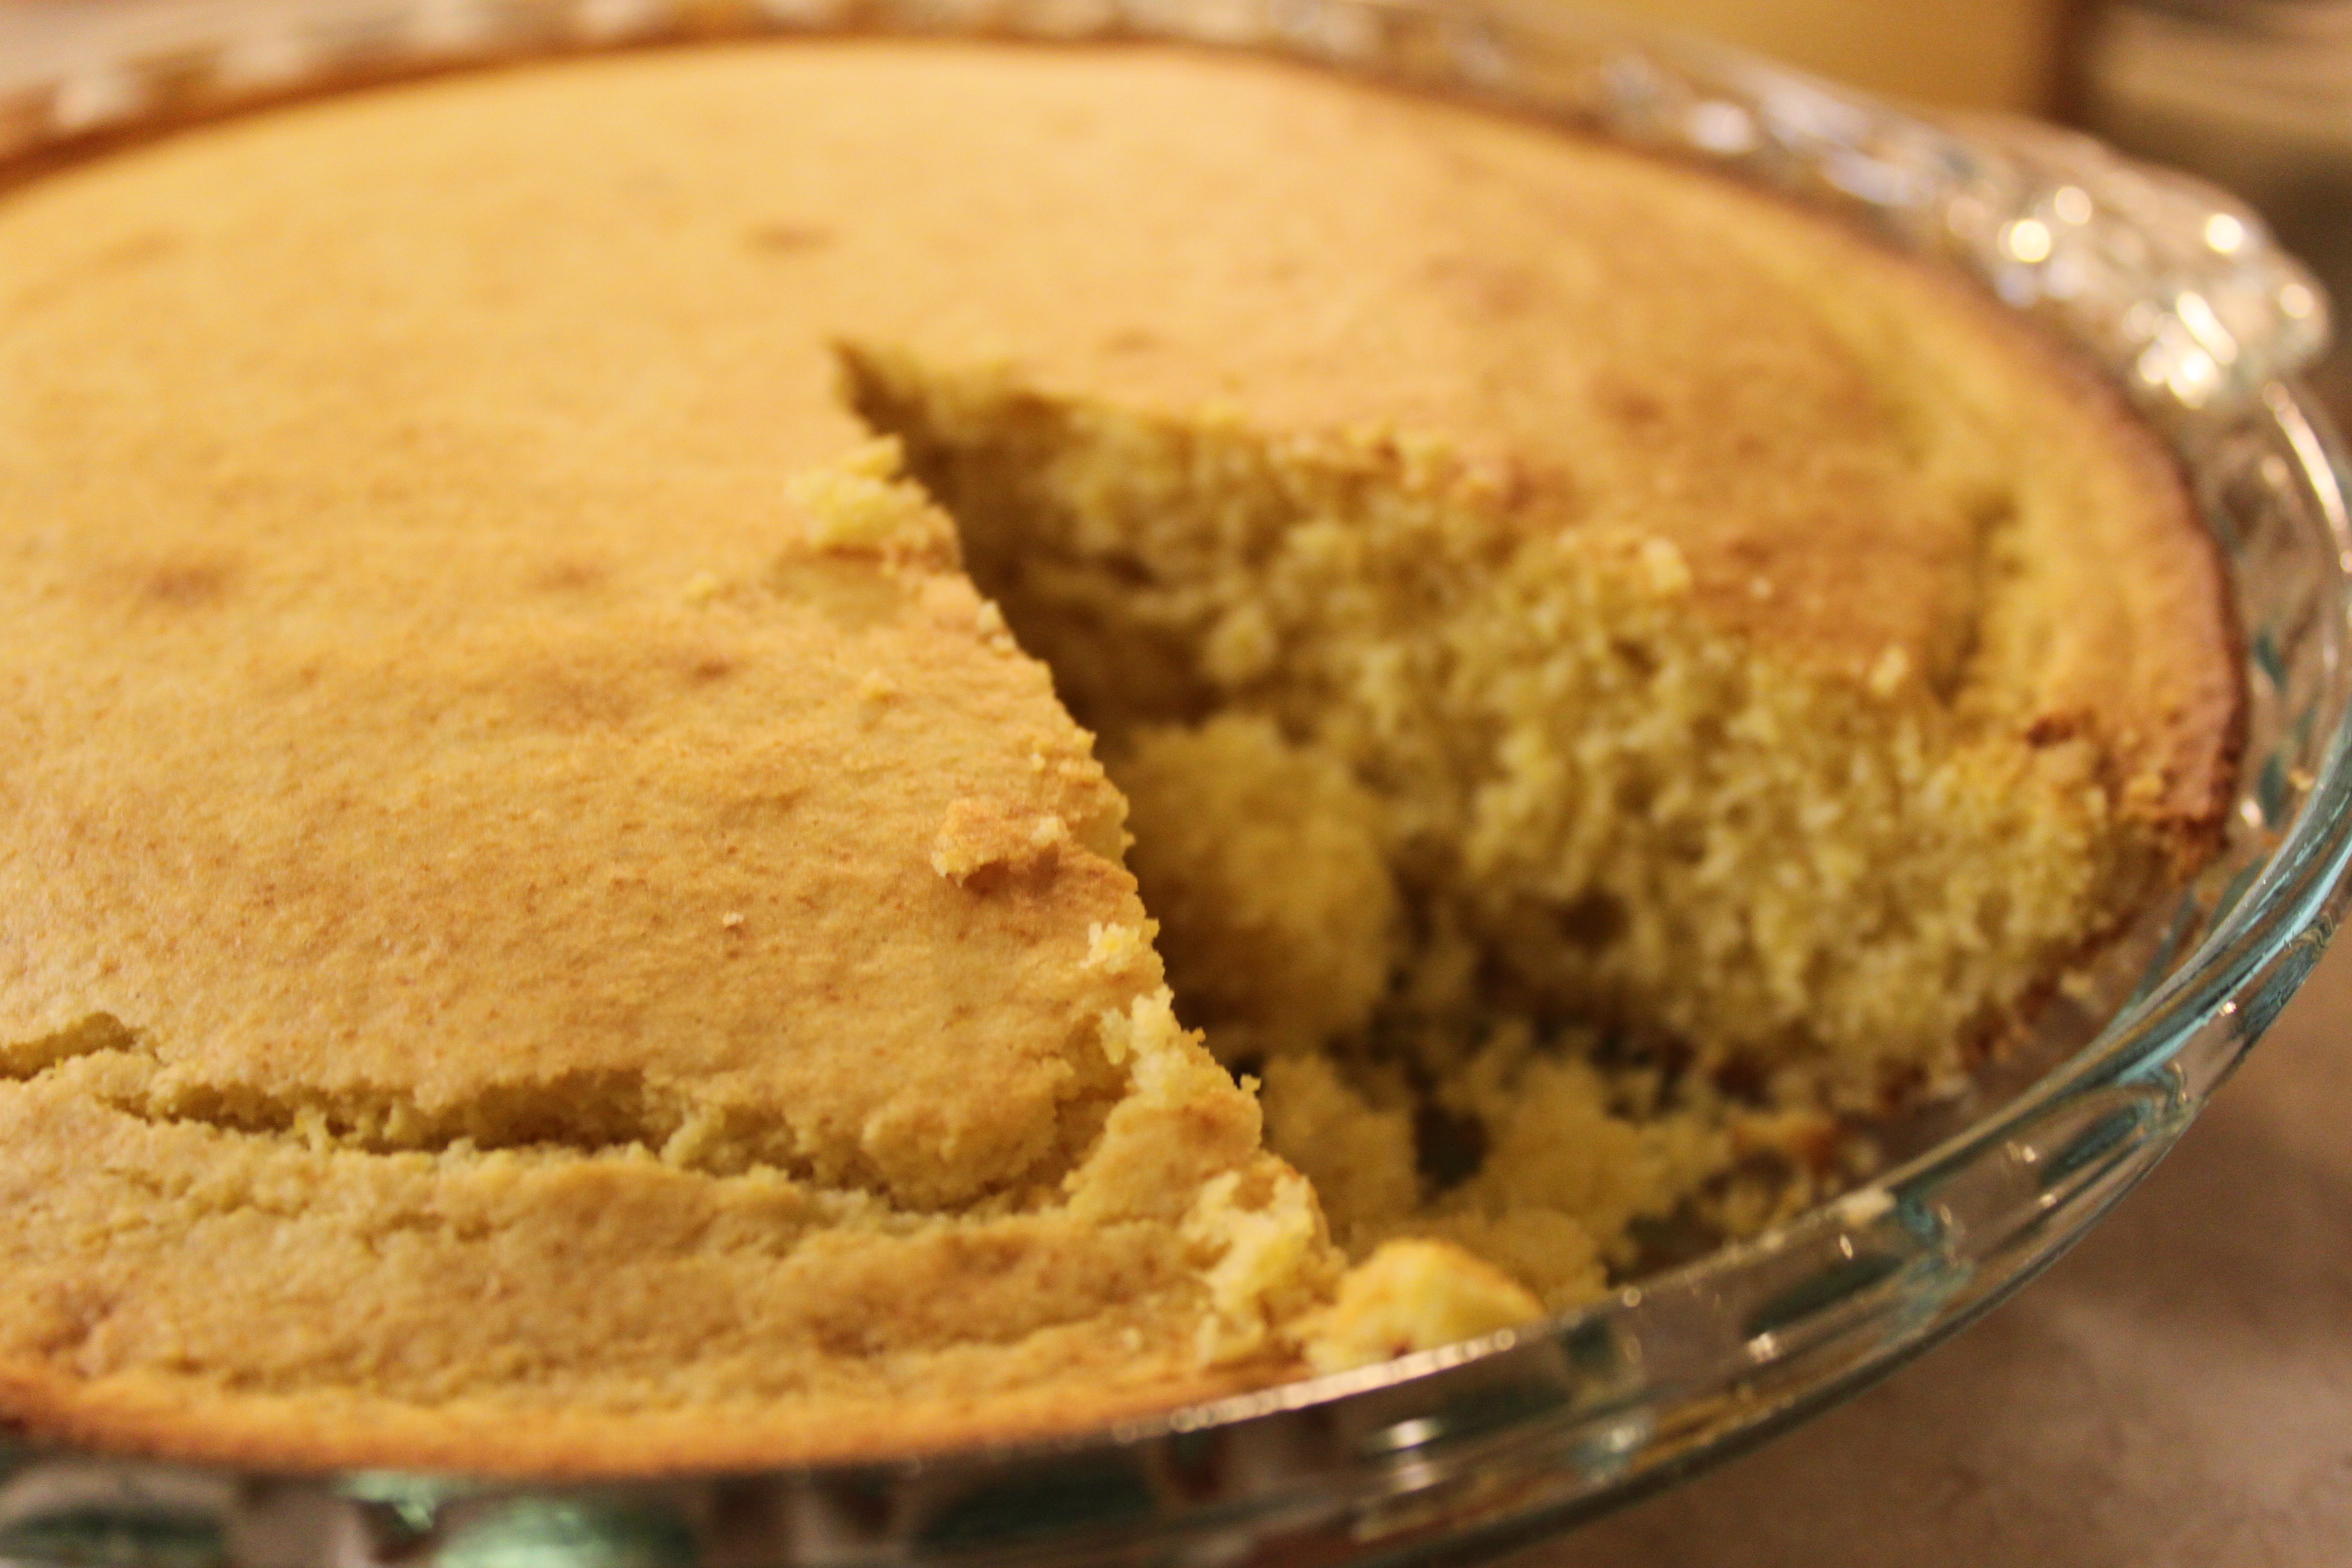 Mom's Cornbread // Having chili for dinner? Make this quick & easy cornbread to go along with it. Great served hot out of the oven with butter and honey. | Tried and Tasty